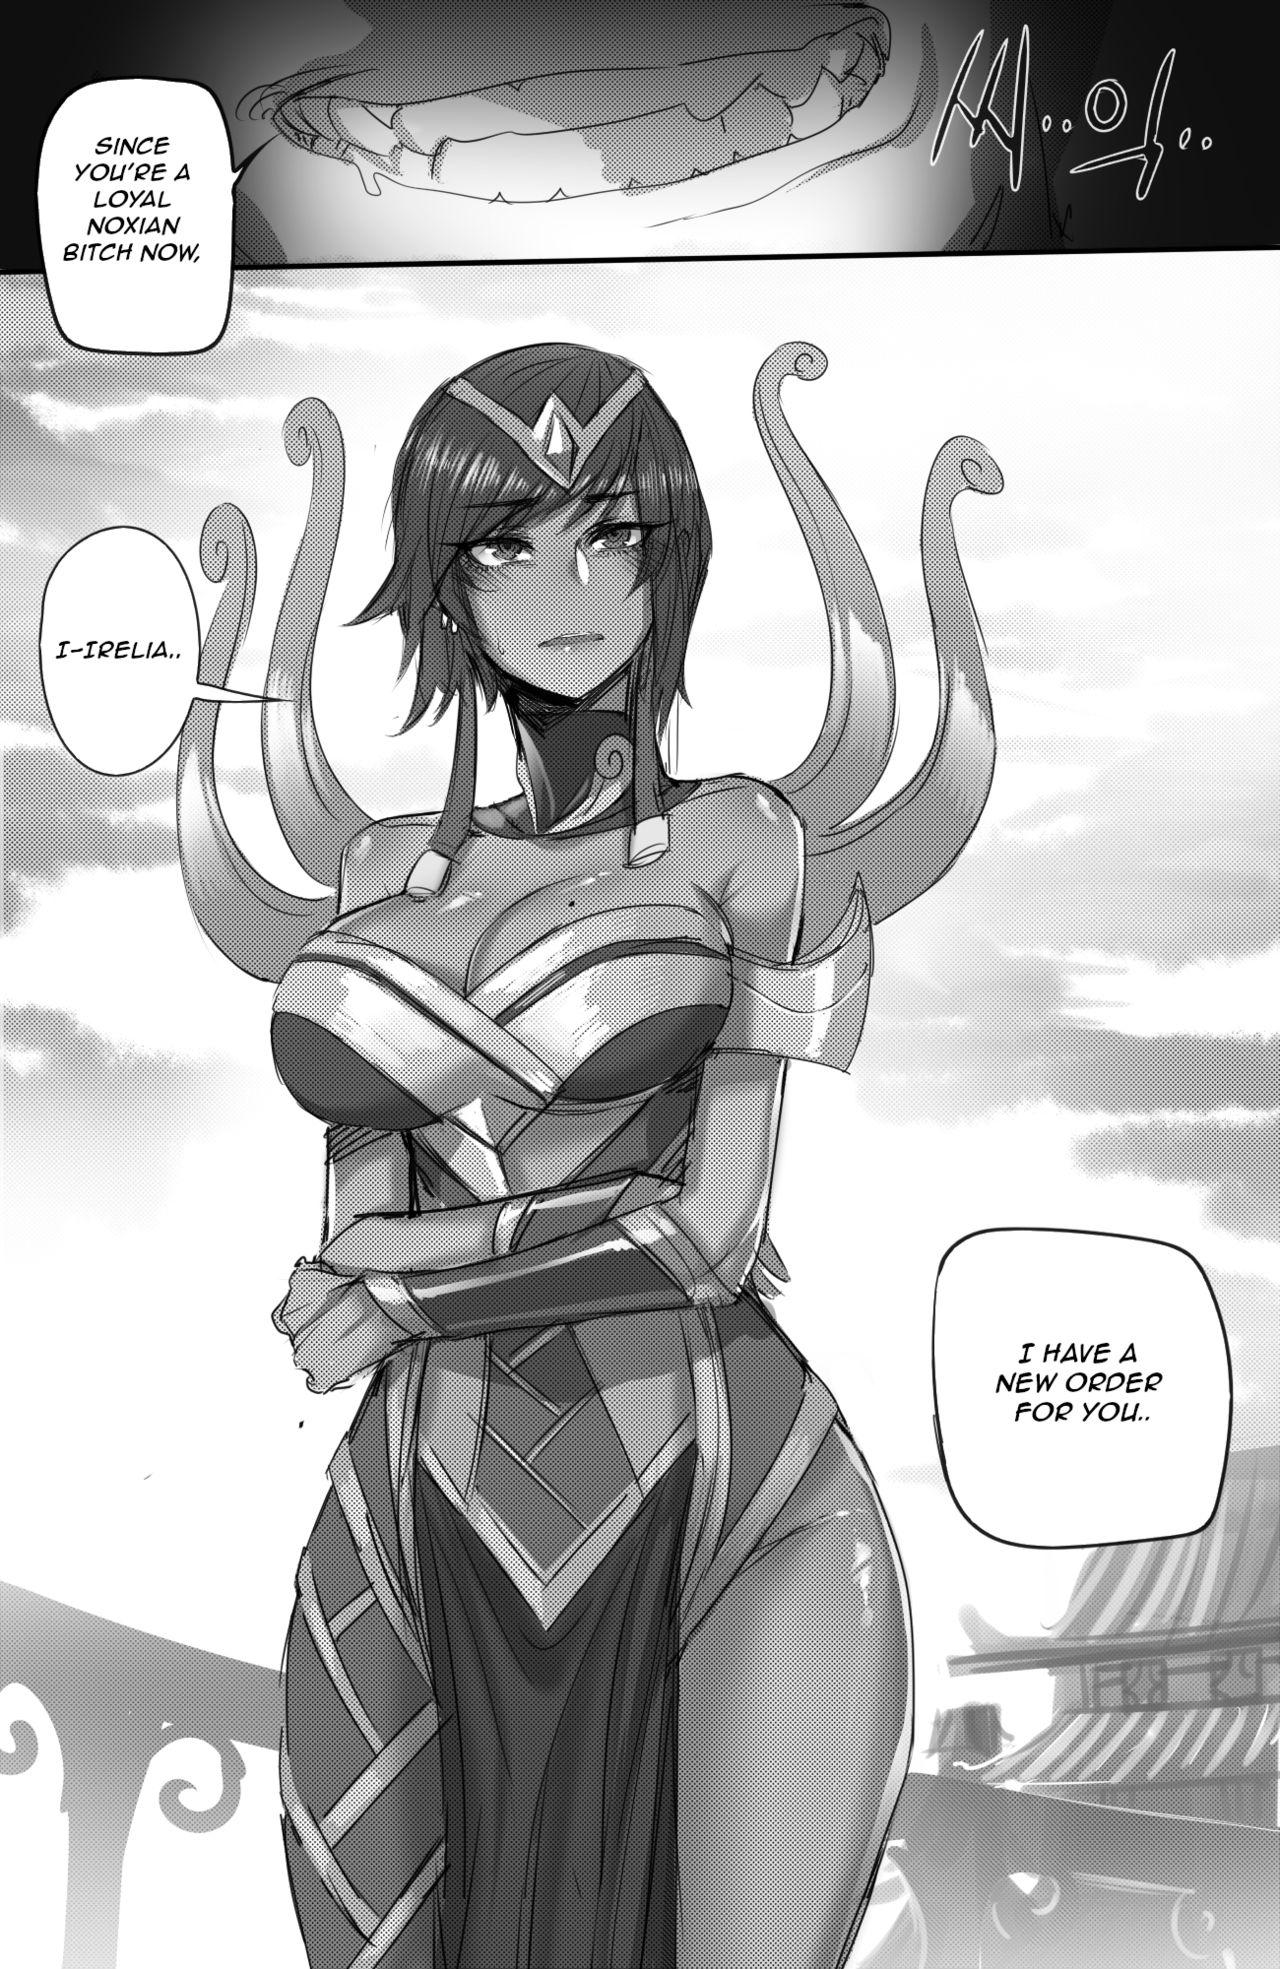 Long The Fall of Irelia 2 - League of legends Porn Blow Jobs - Page 24